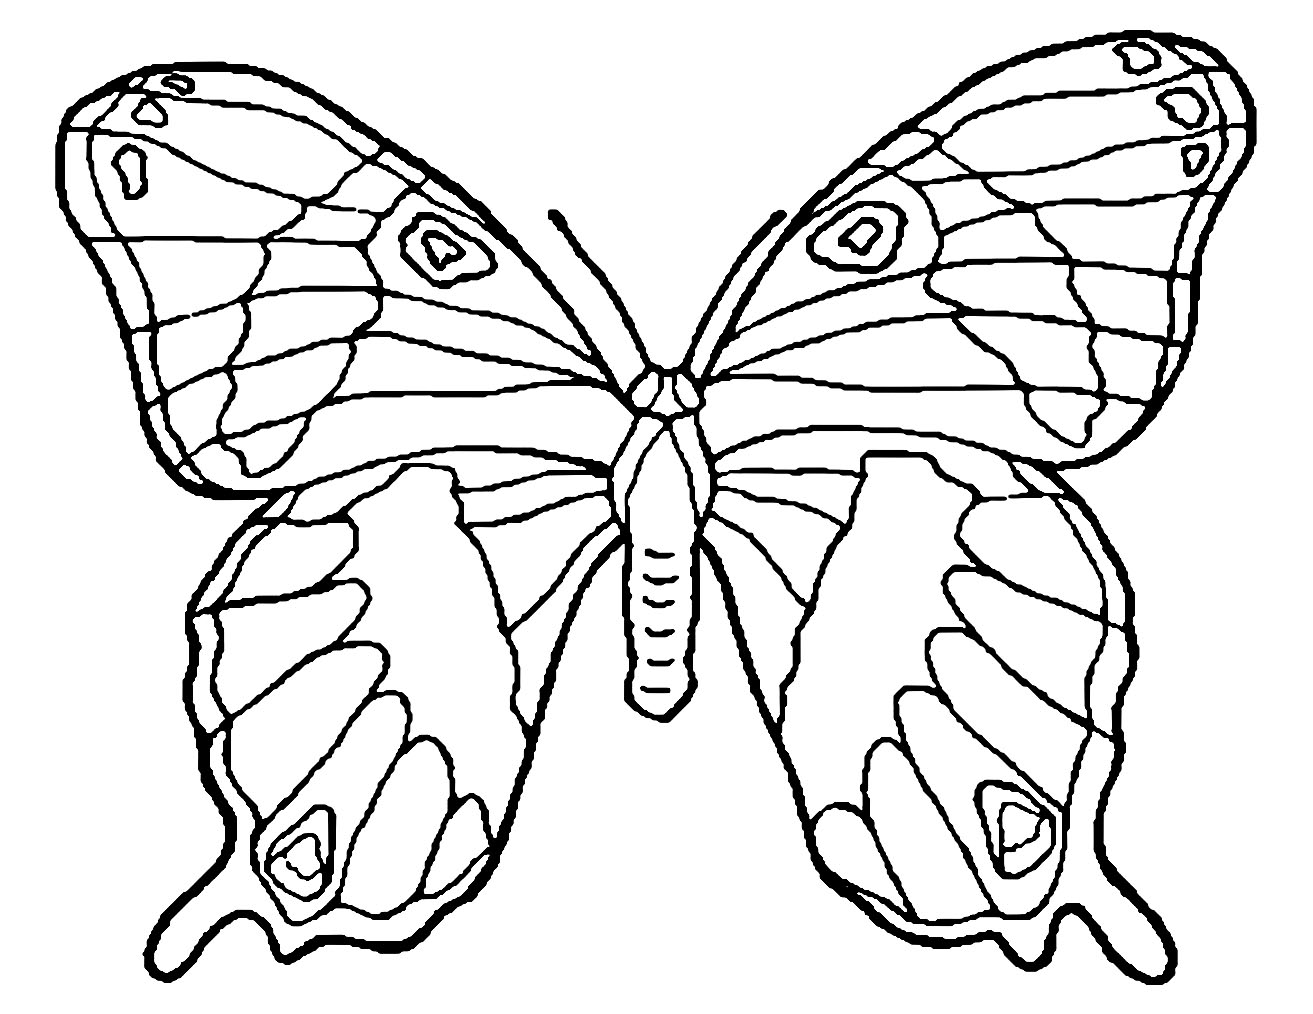 kleurplaat-vlinder-afb-6834-butterfly-coloring-page-colorful-images